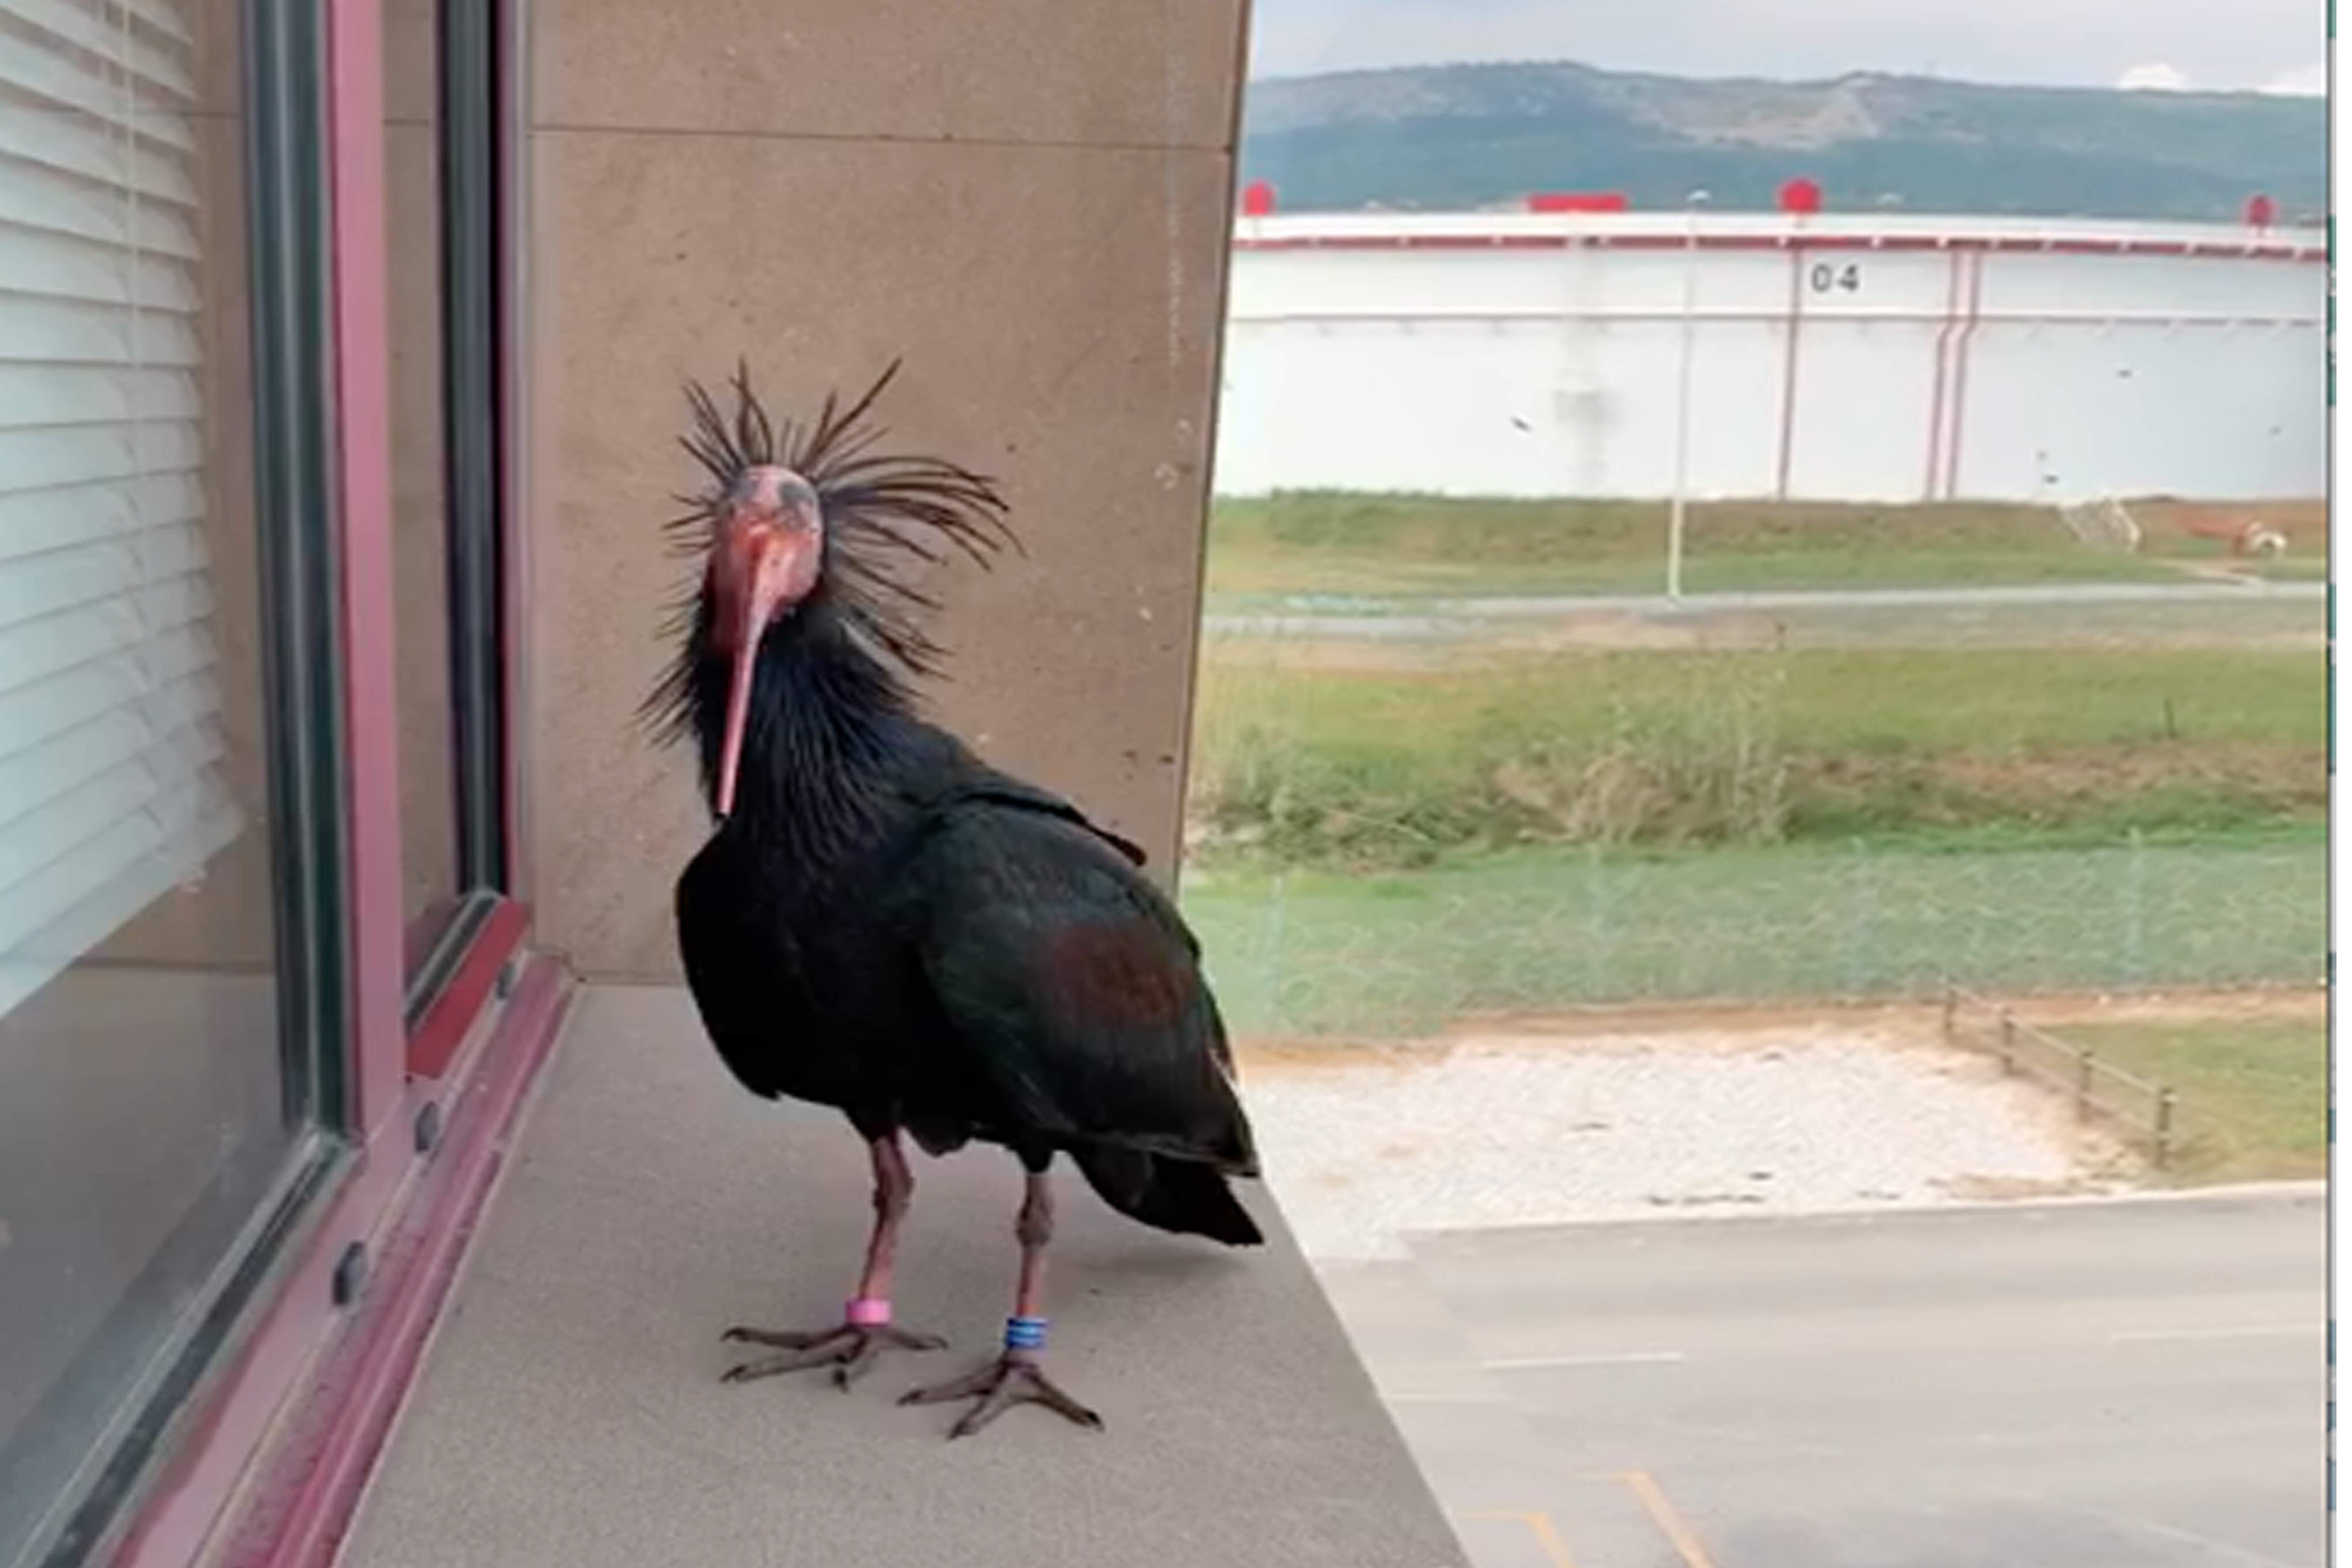 A SPECIAL GUEST AT SIOT: THE NORTHERN BALD IBIS